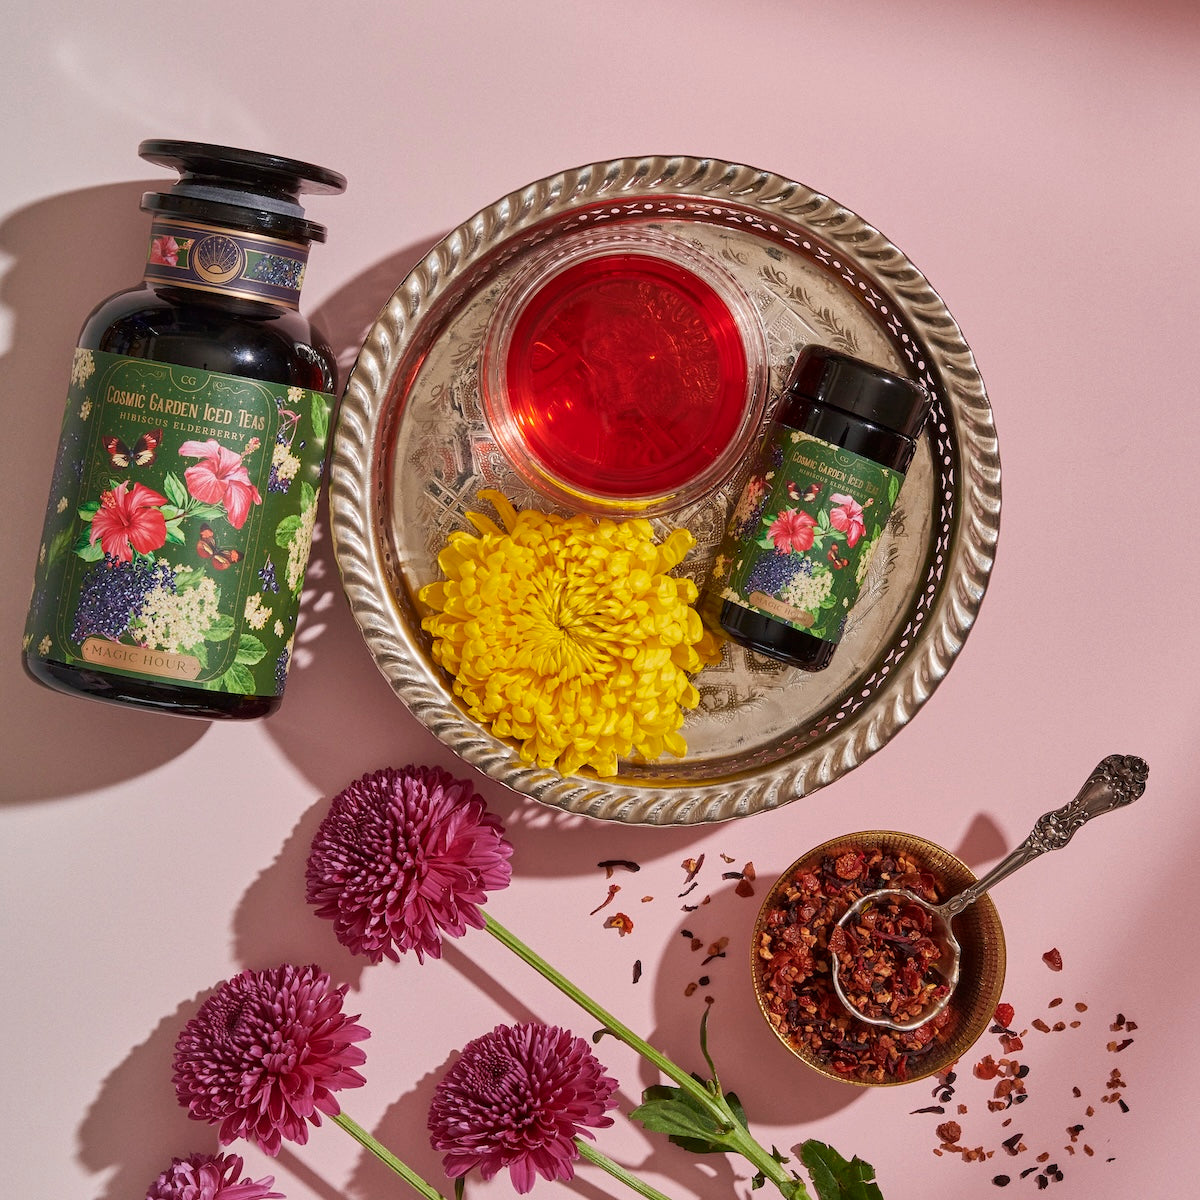 A jar and a smaller container of Magic Hour's Hibiscus Elderberry: Cosmic Garden Iced Tea are placed on a decorative silver tray, accompanied by a vibrant yellow flower and a clear glass of red liquid. The scene is bordered by purple flowers, and a spoon with dried loose leaf tea rests nearby.